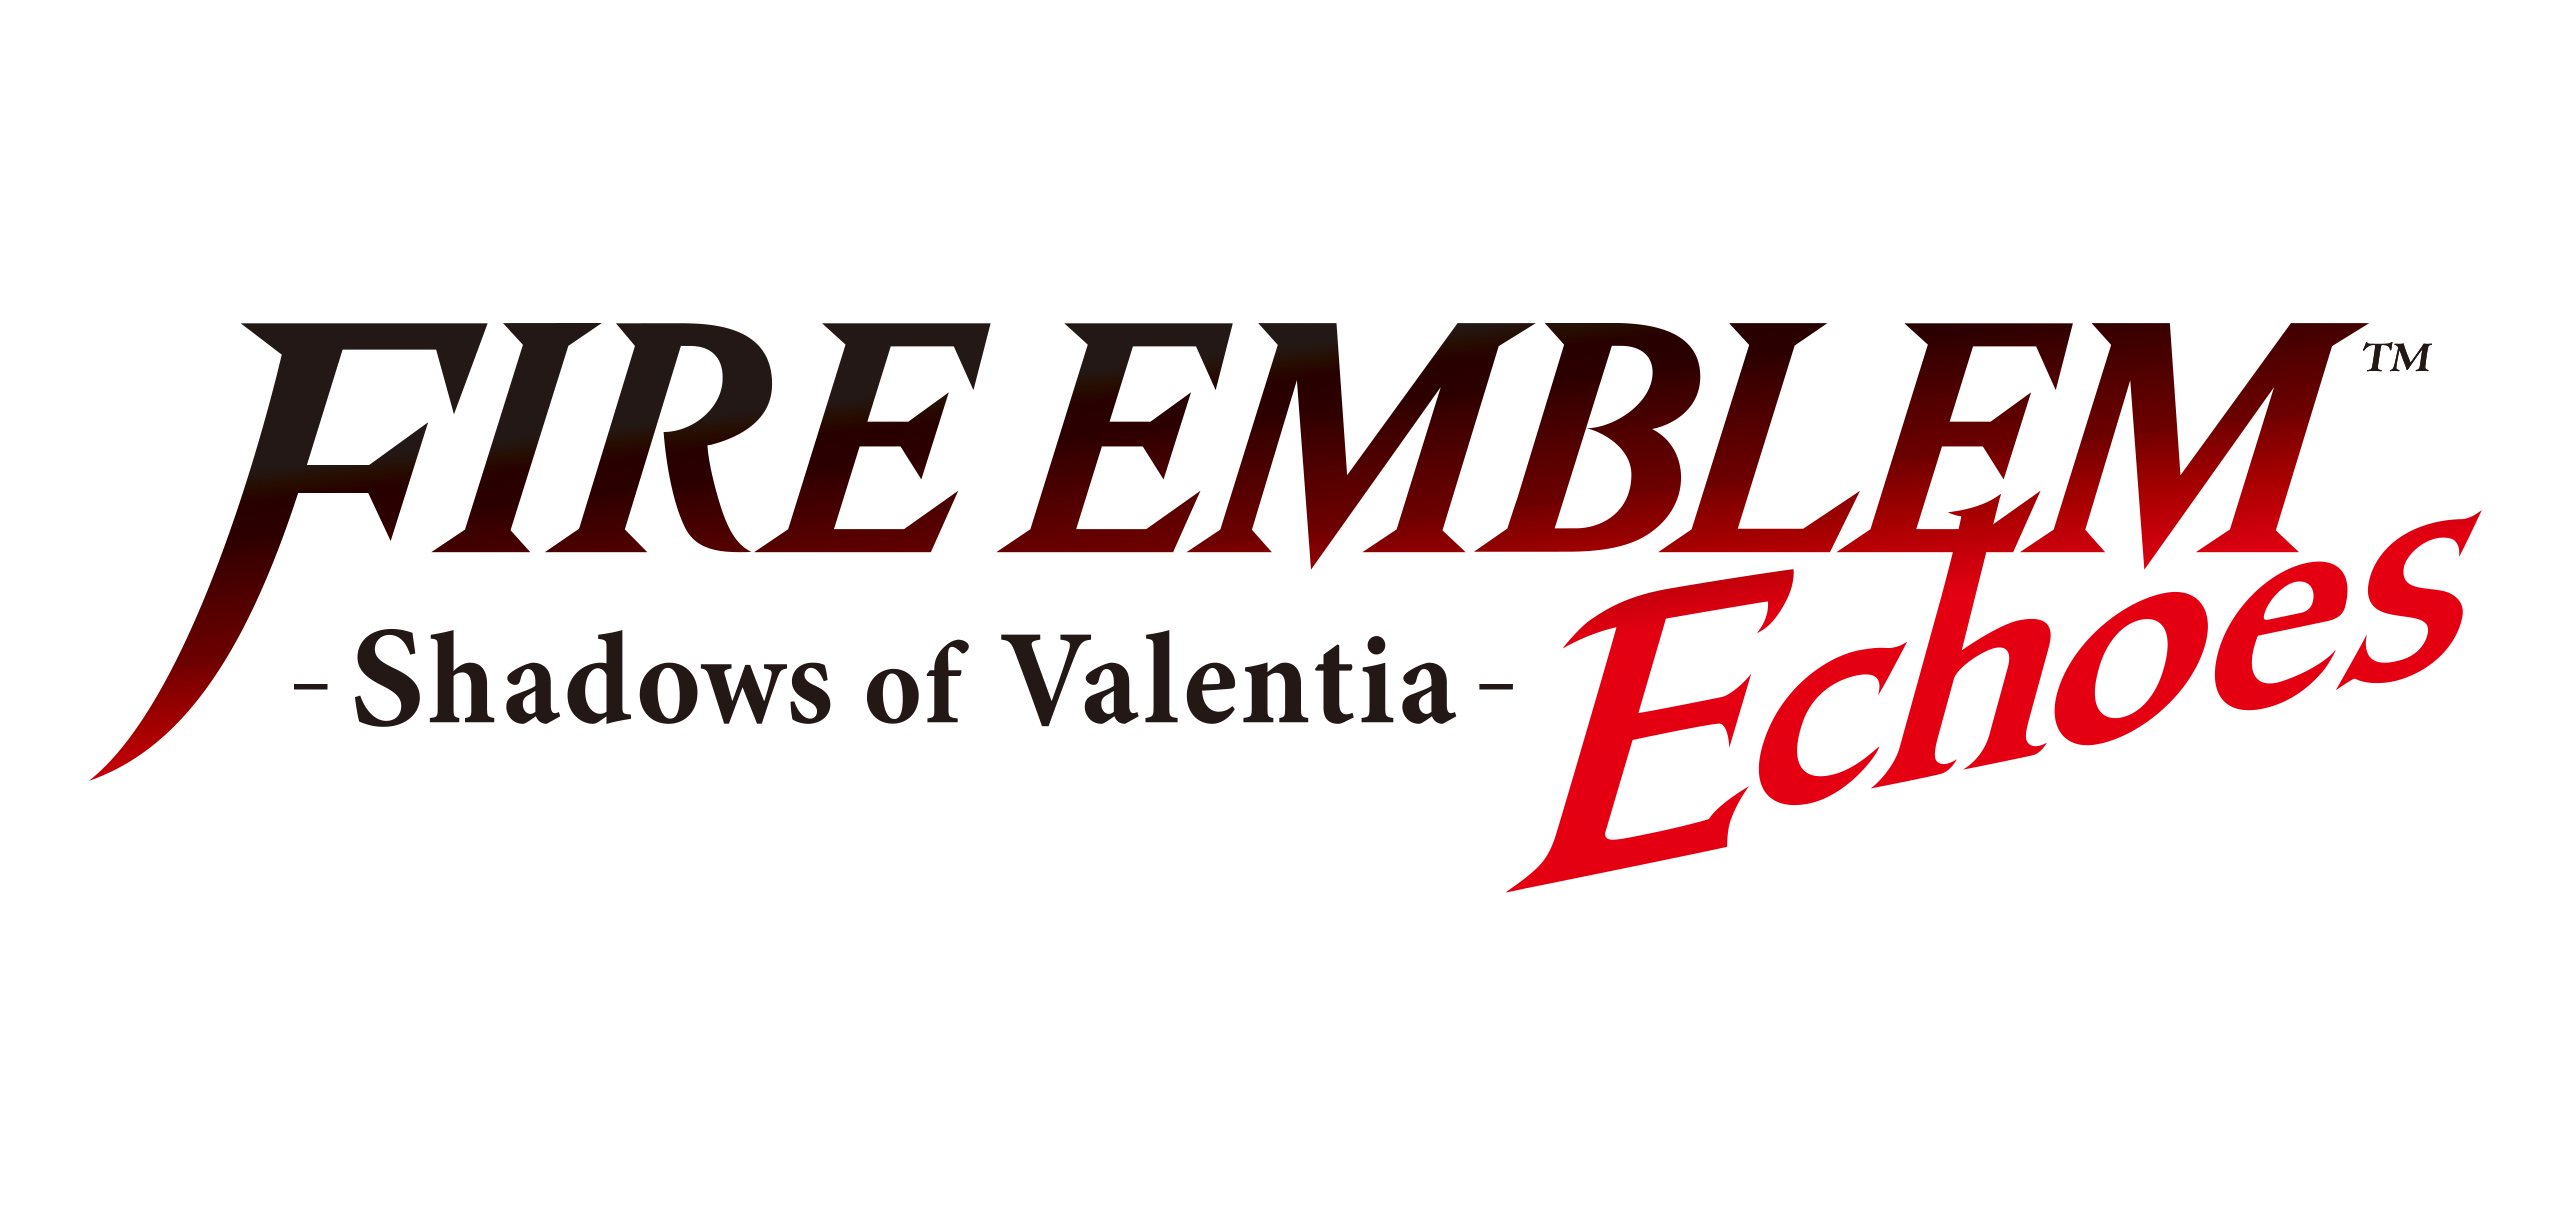 Release] Fire Emblem Echoes:Shadows of Valentia Spanish Patch | GBAtemp.net  - The Independent Video Game Community